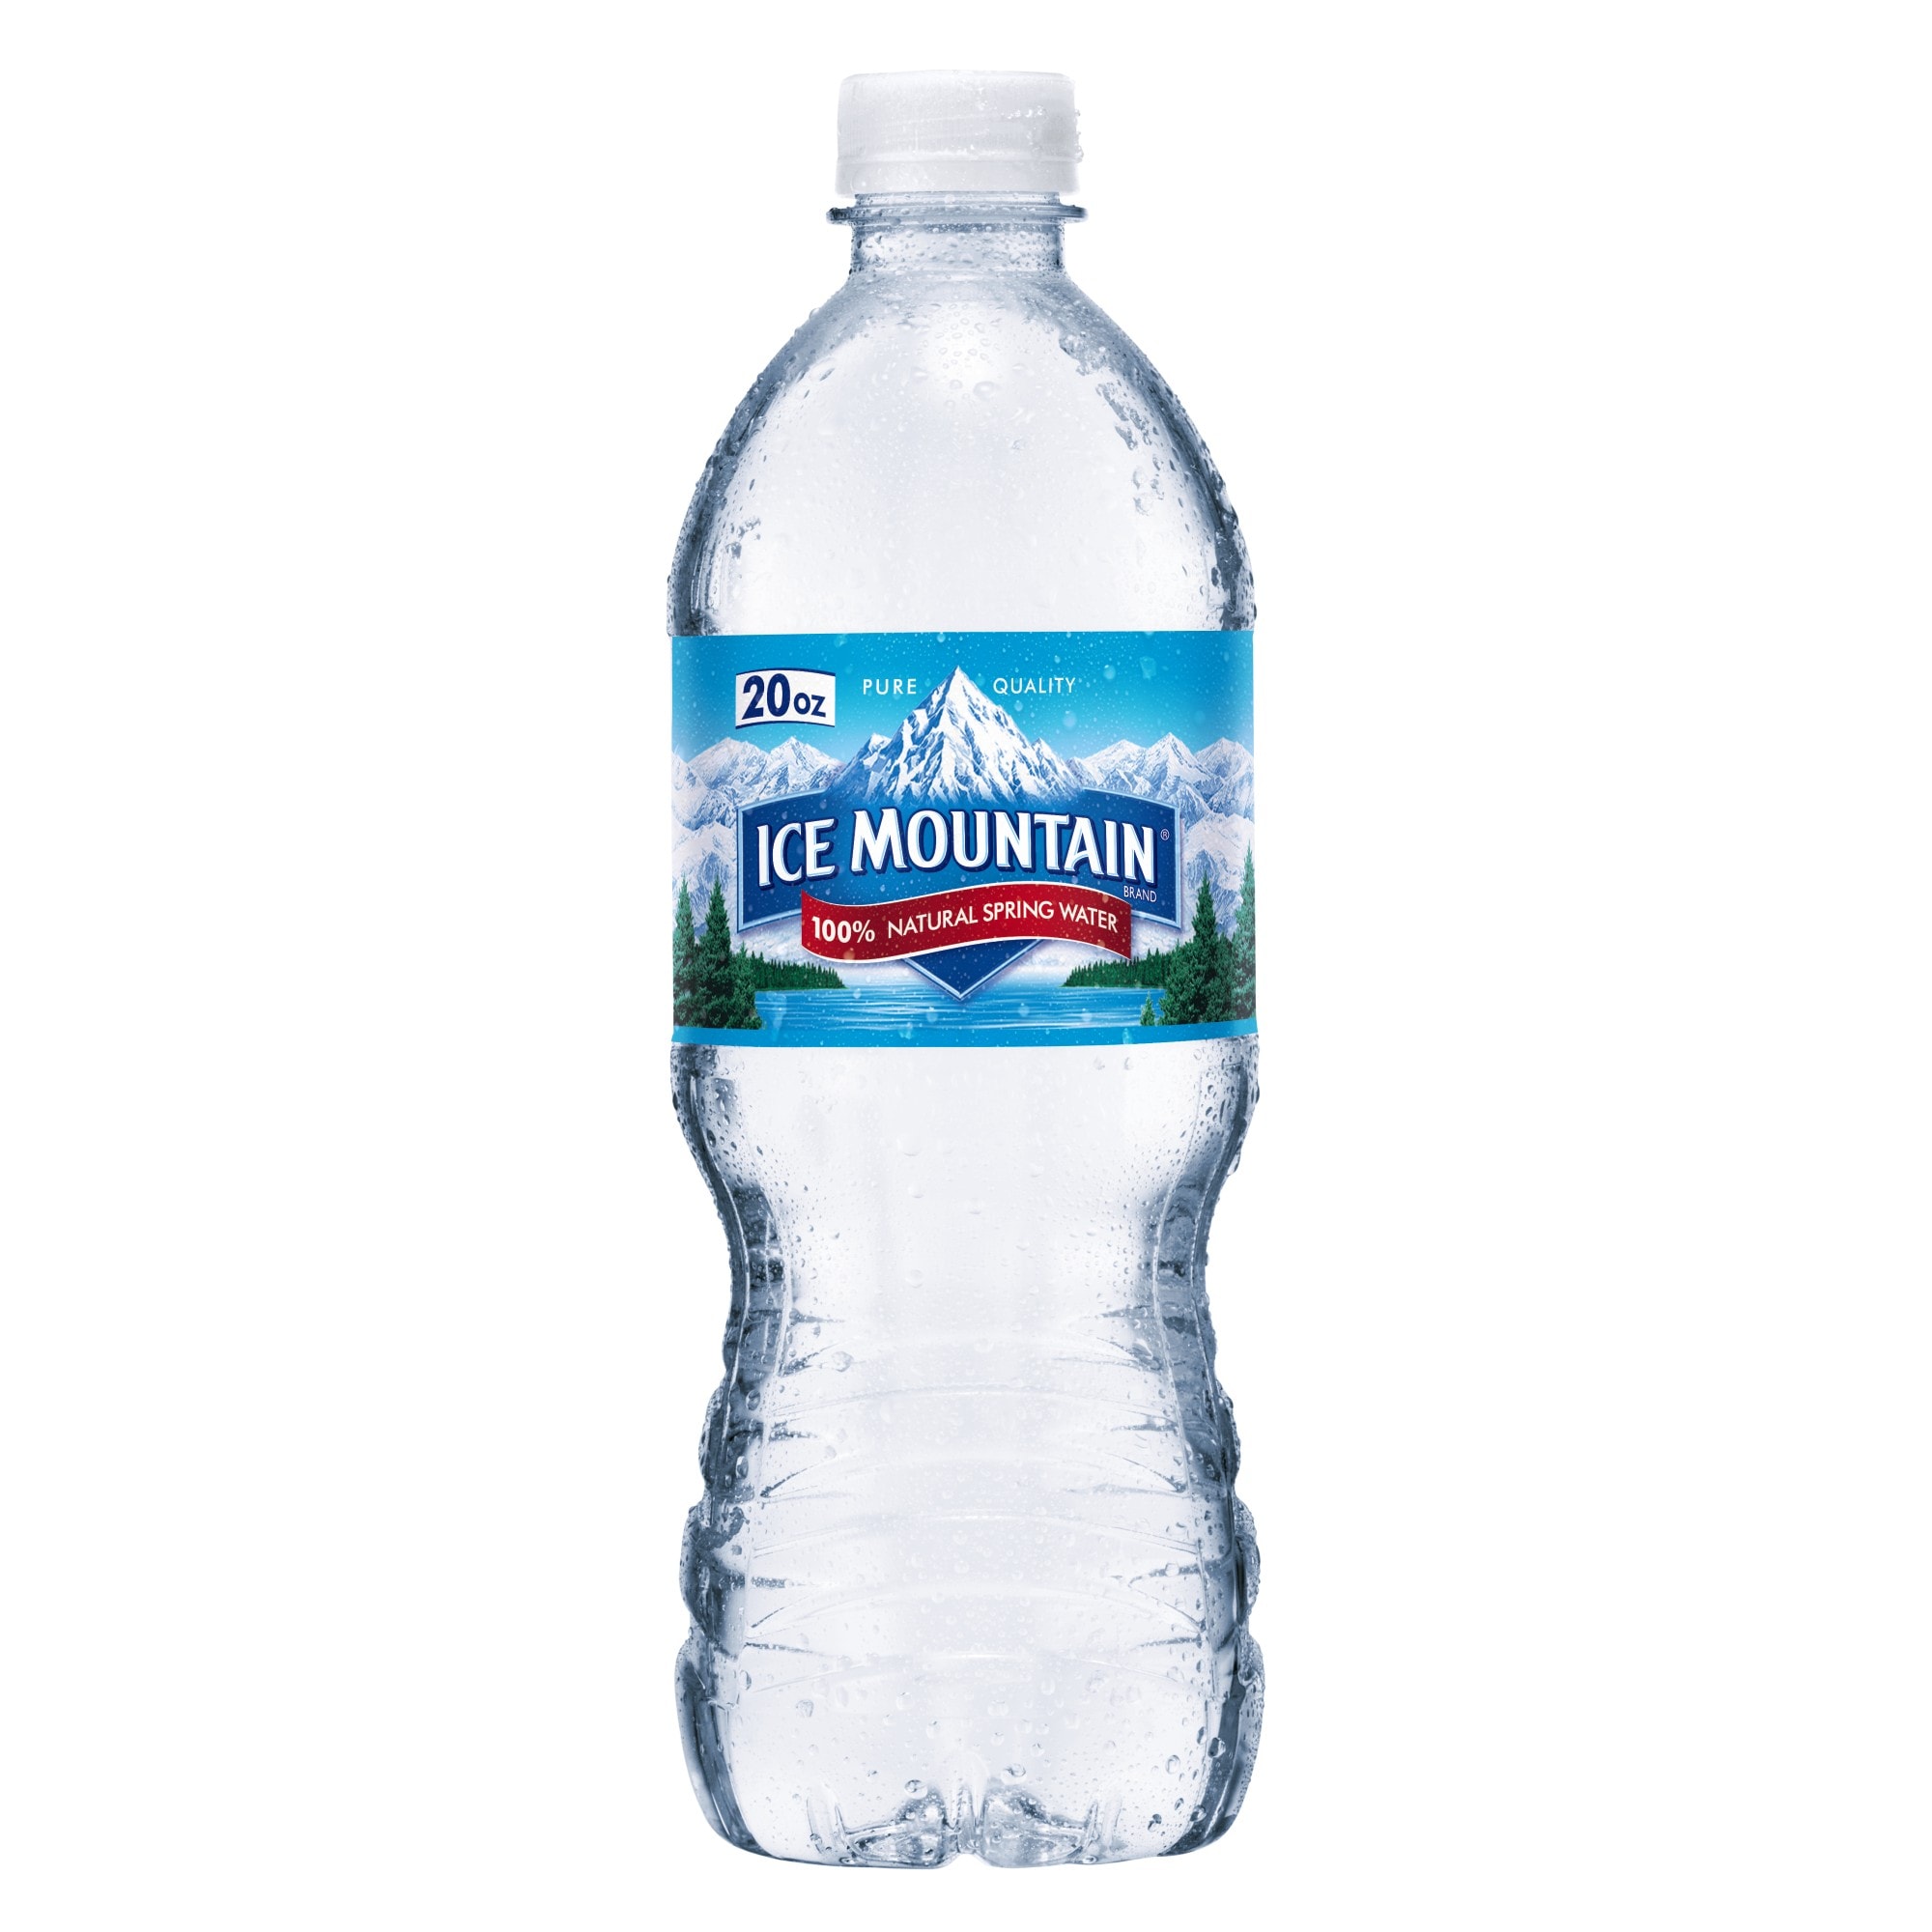 Is Ice Mountain Water Good for You? Evaluating Drinking Choices